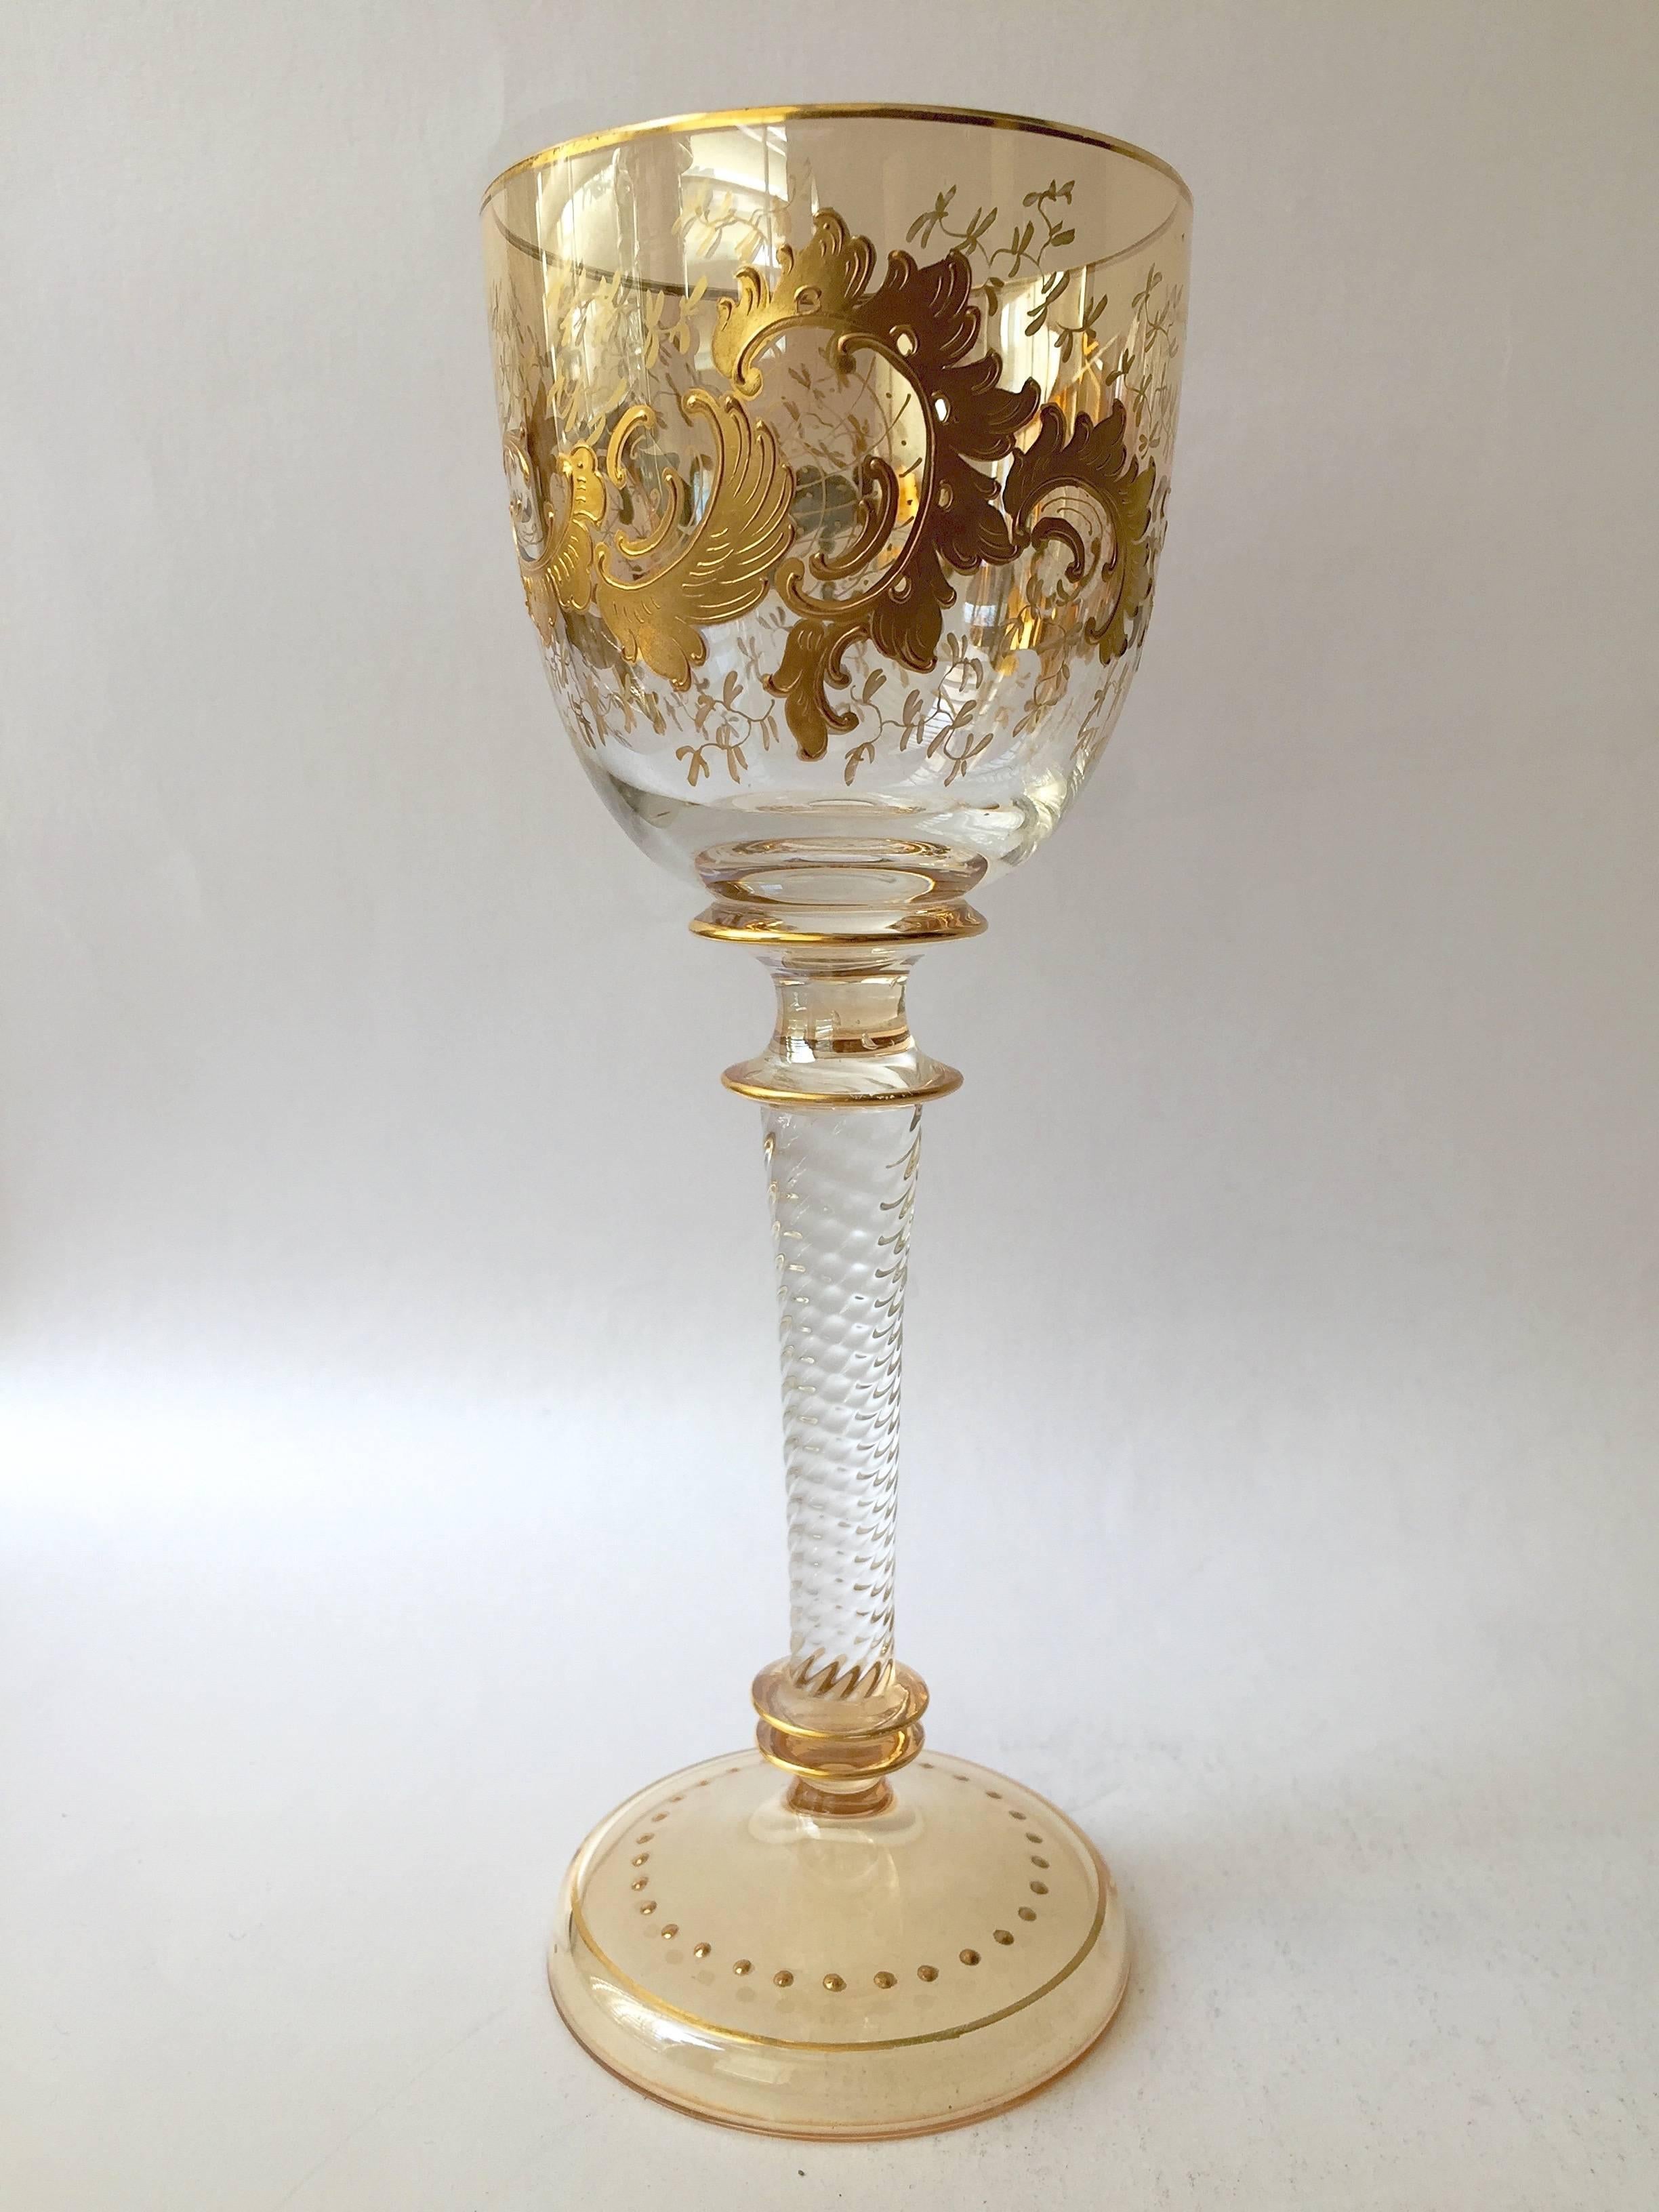 Over the top beautiful set of six Moser two color raised paste gilt wine stems
in fantastic condition, perfect for the holidays and gorgeous on display in a cabinet or bar while not in use. These are very rare the rich raise gold laid on heavily in